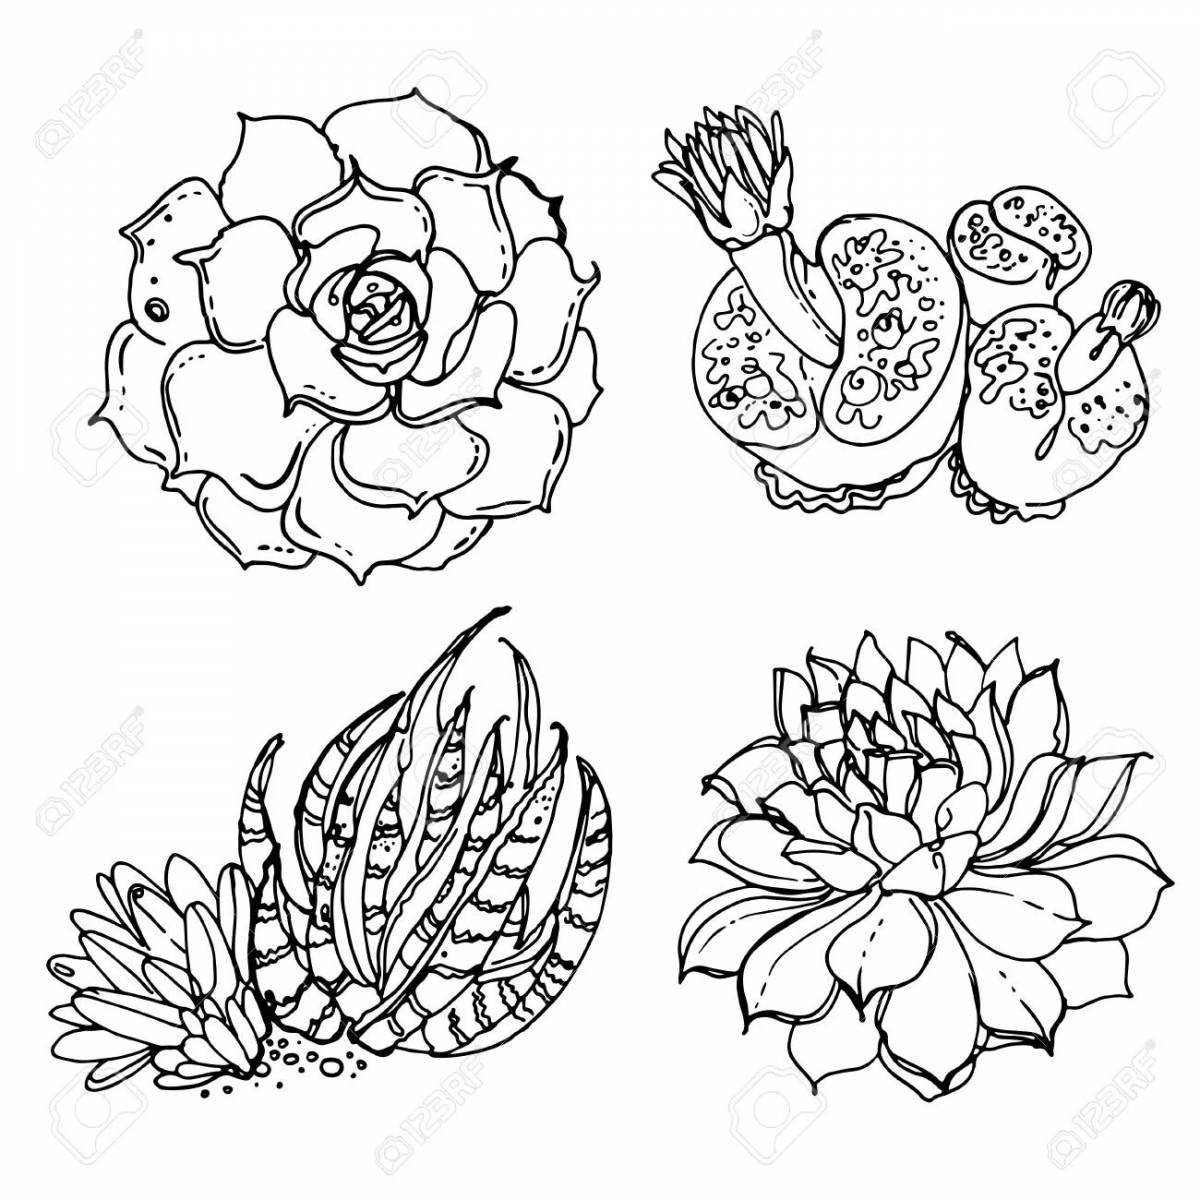 Awesome succulent coloring pages